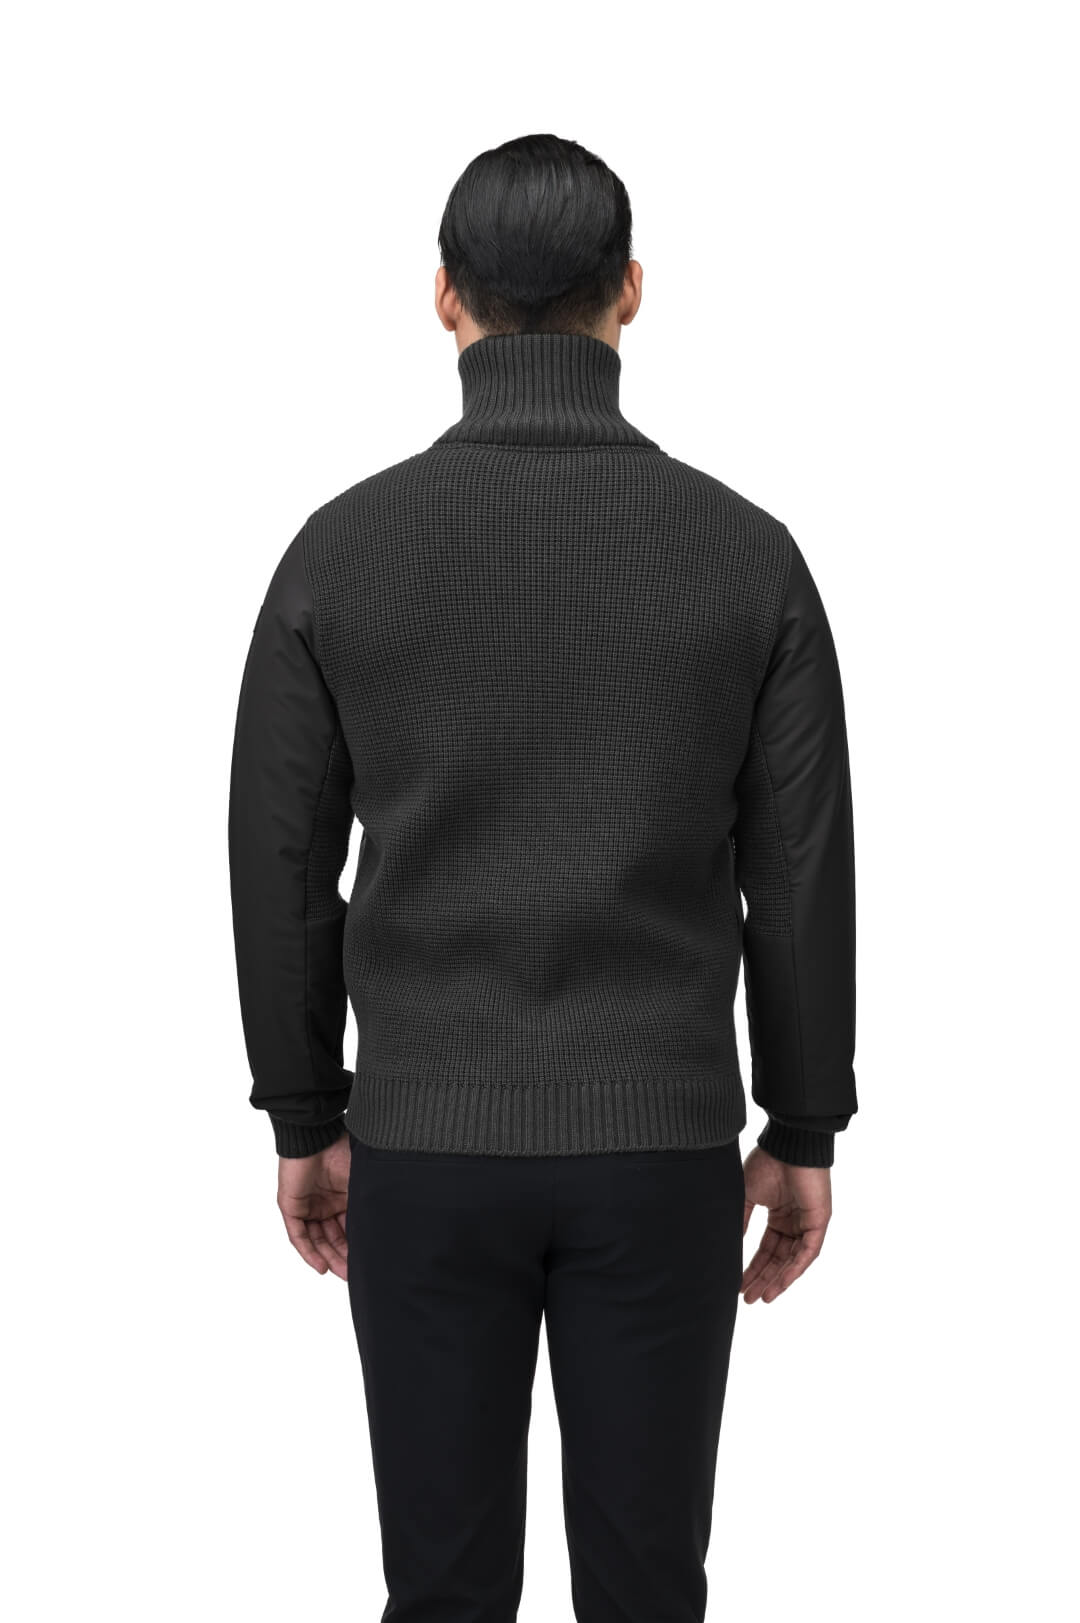 Layton Men's Tactical Hybrid Sweater in hip length, Primaloft Gold Insulation Active+, Merion wool knit collar, sleeves, back, and cuffs, two-way front zipper, and pockets at chest and waist, in Black